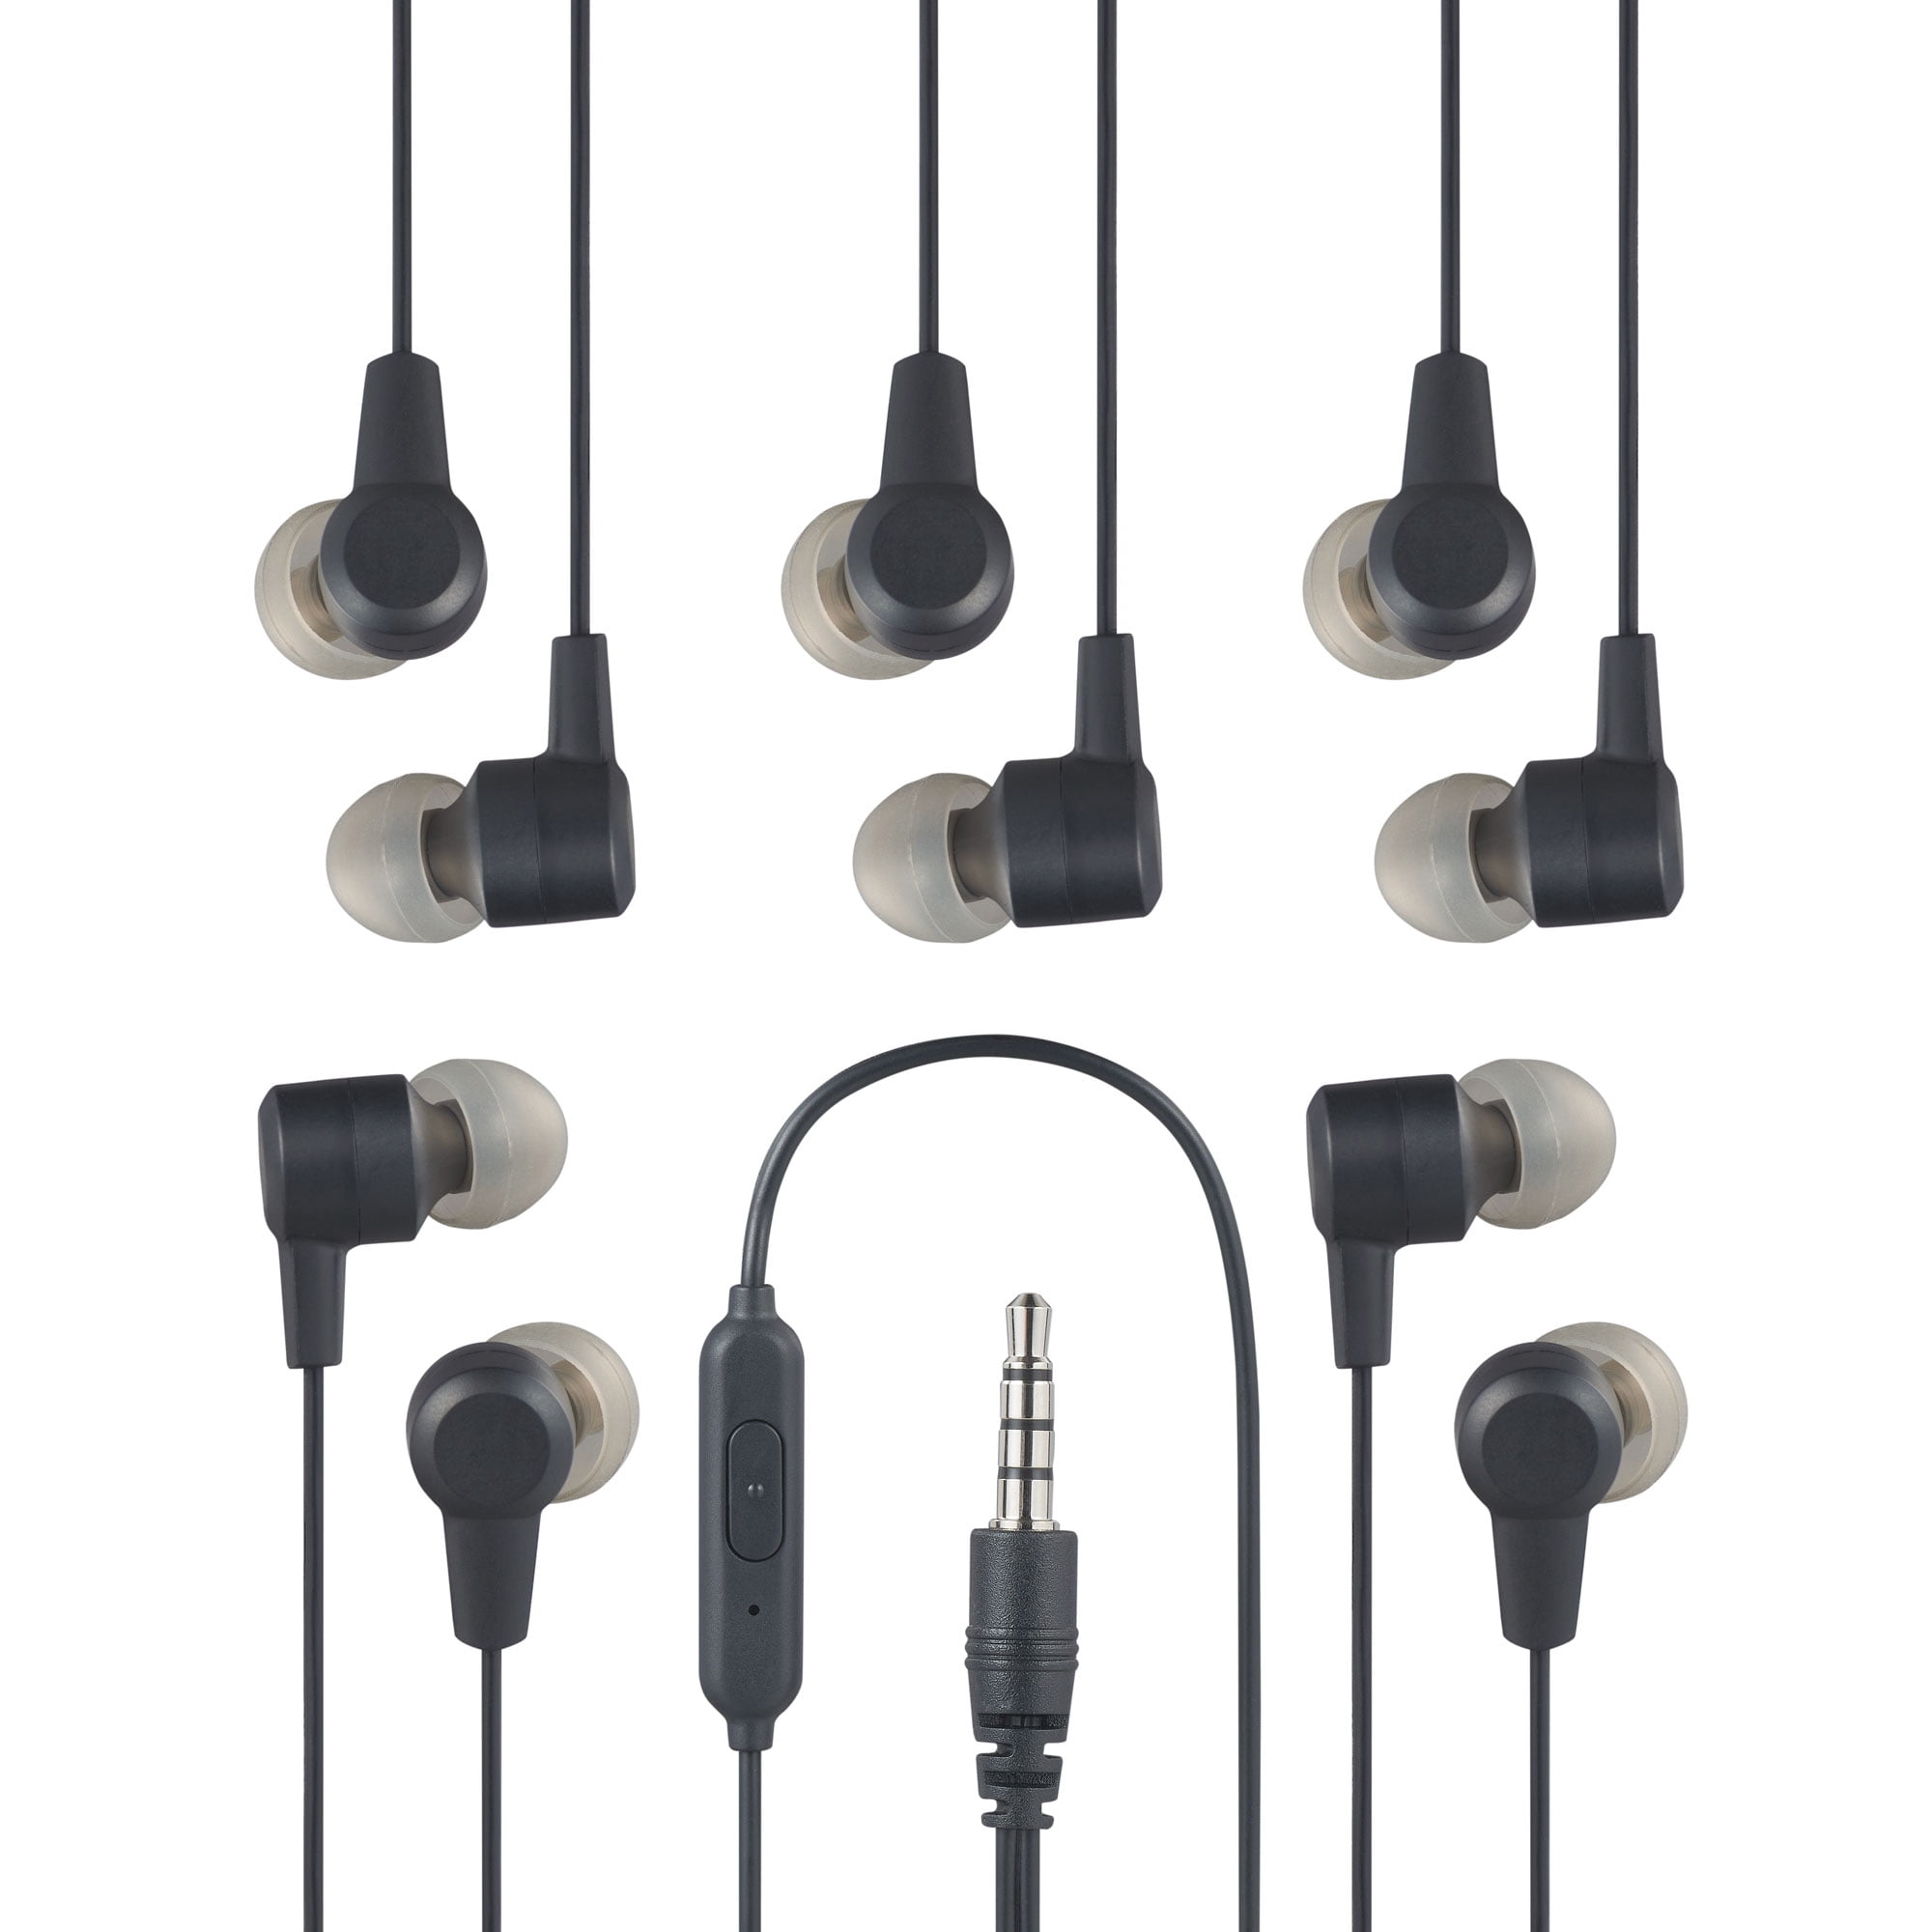 onn. Wired Earphones with Microphone-3.5mm jack, Black, 5 Pack